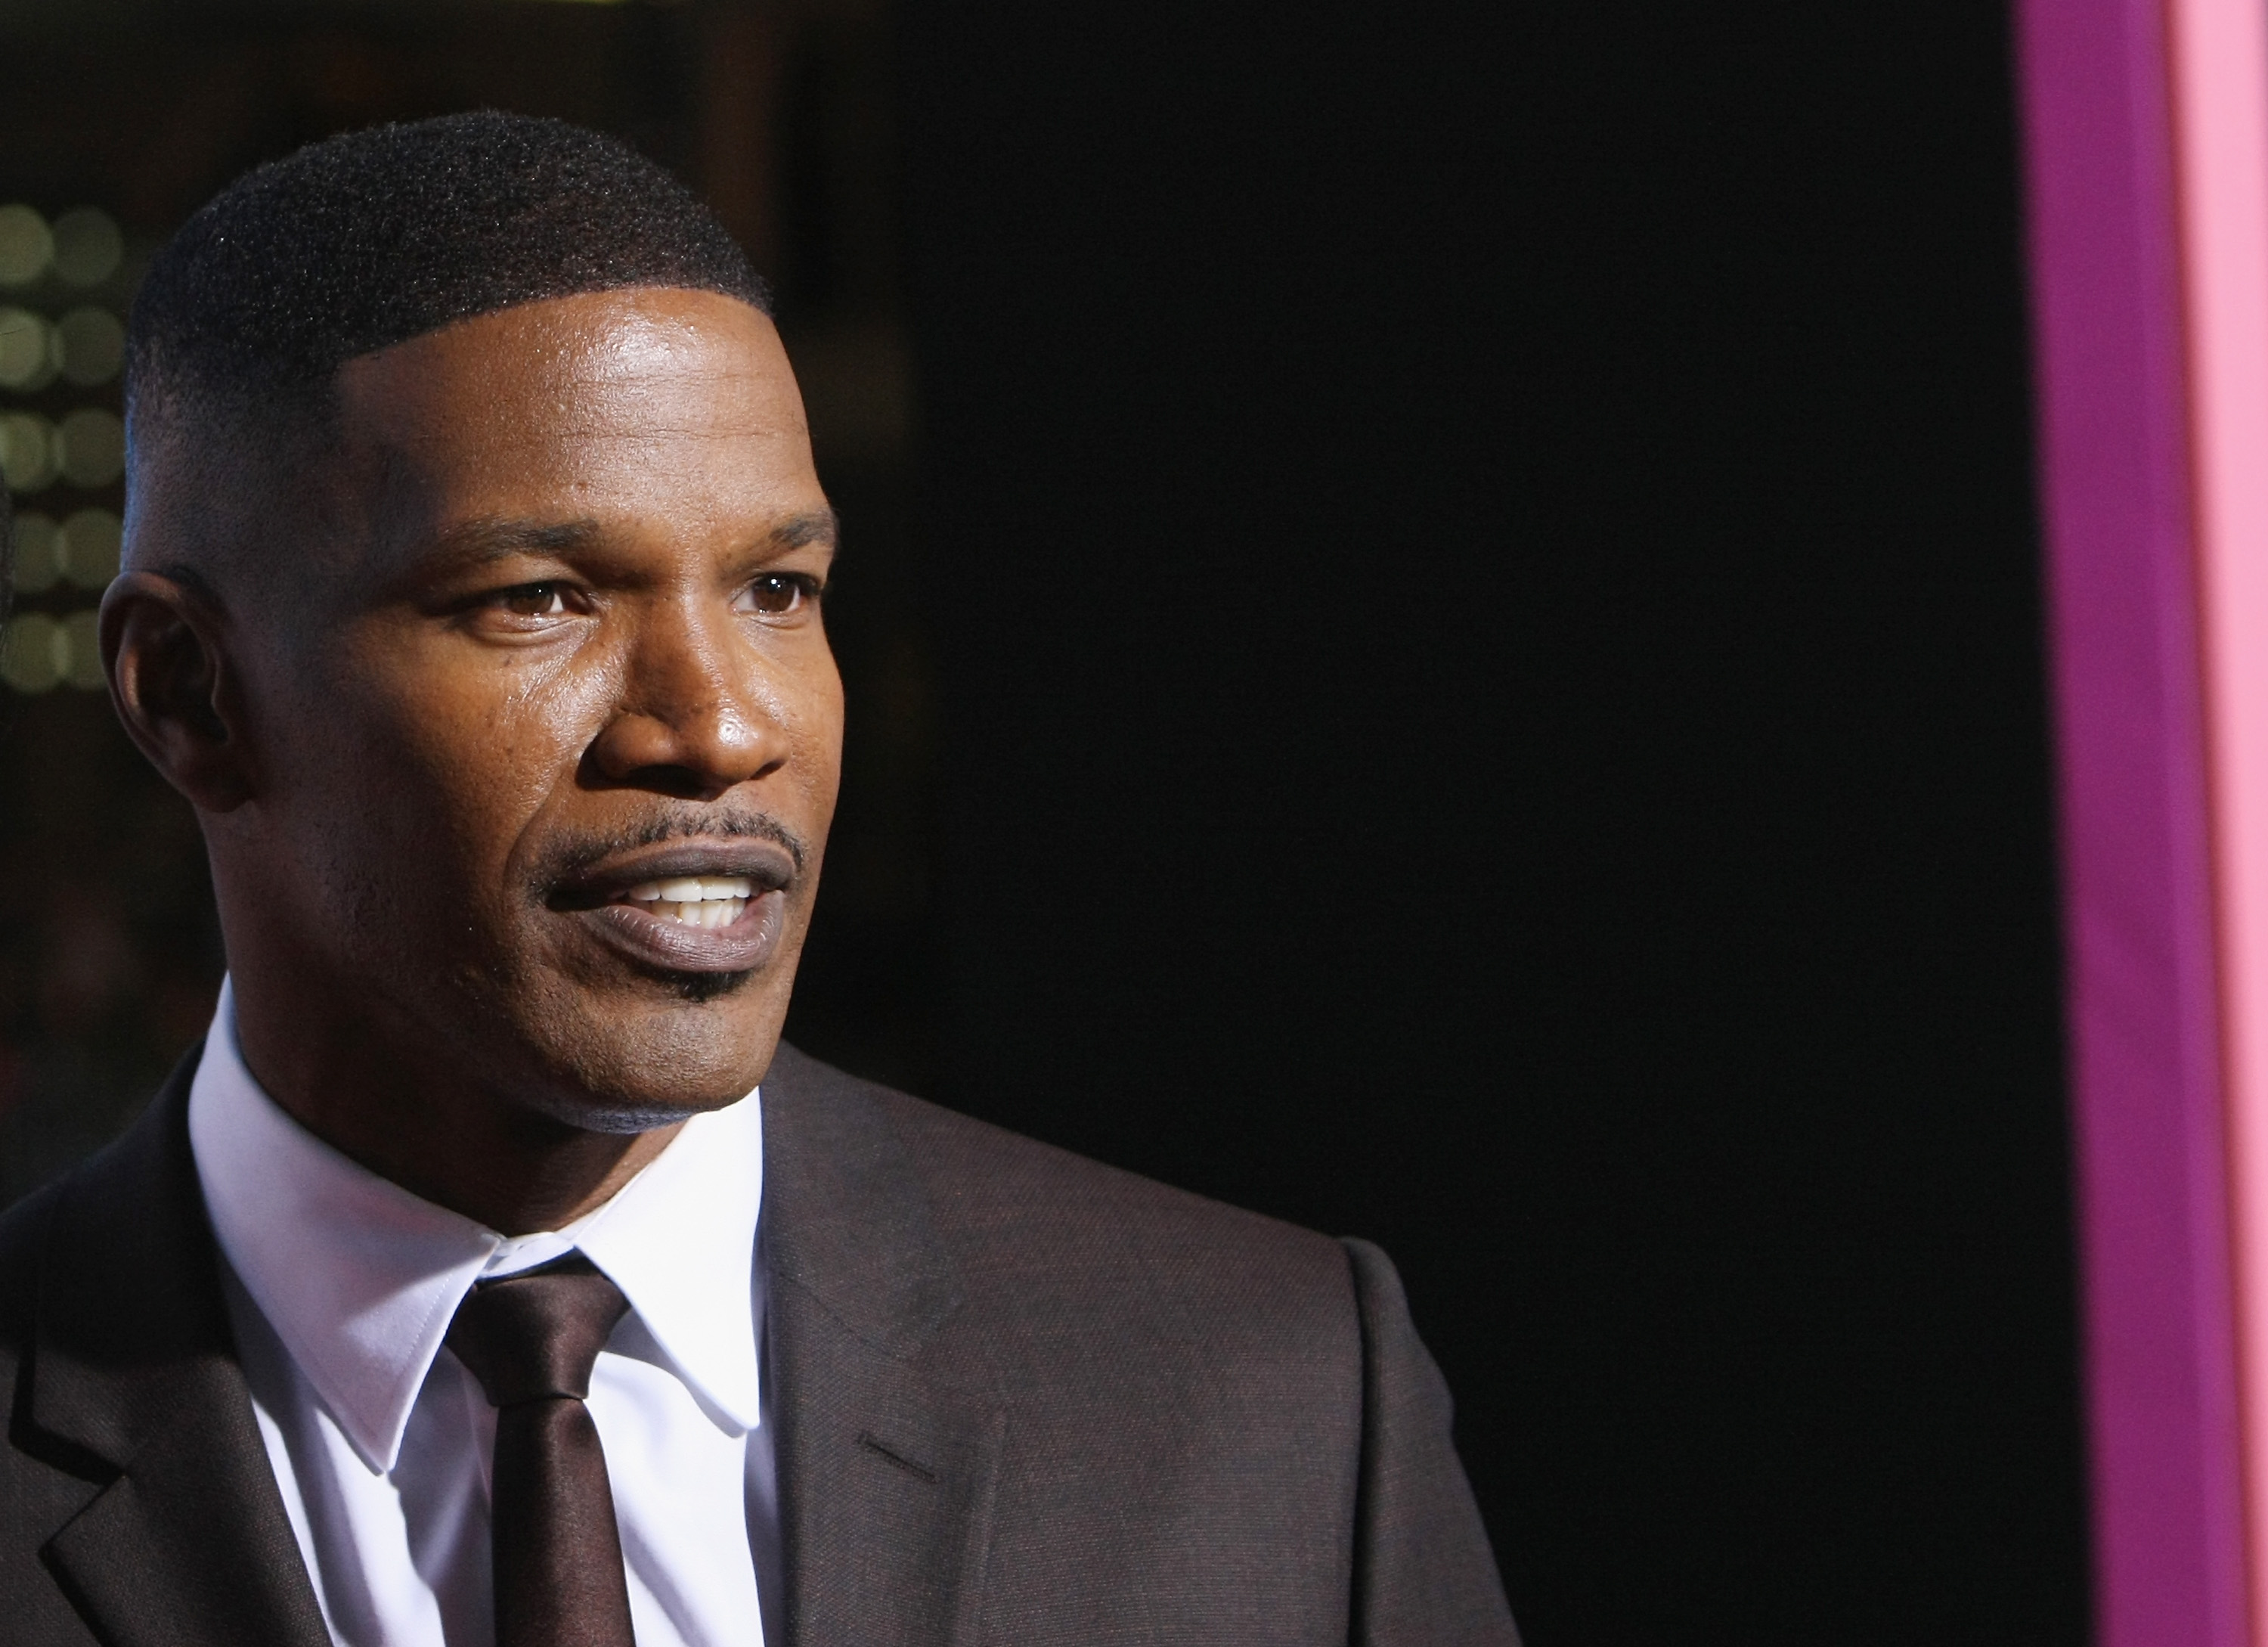 Jamie Foxx attends the Los Angeles premiere of New Line Cinema's 